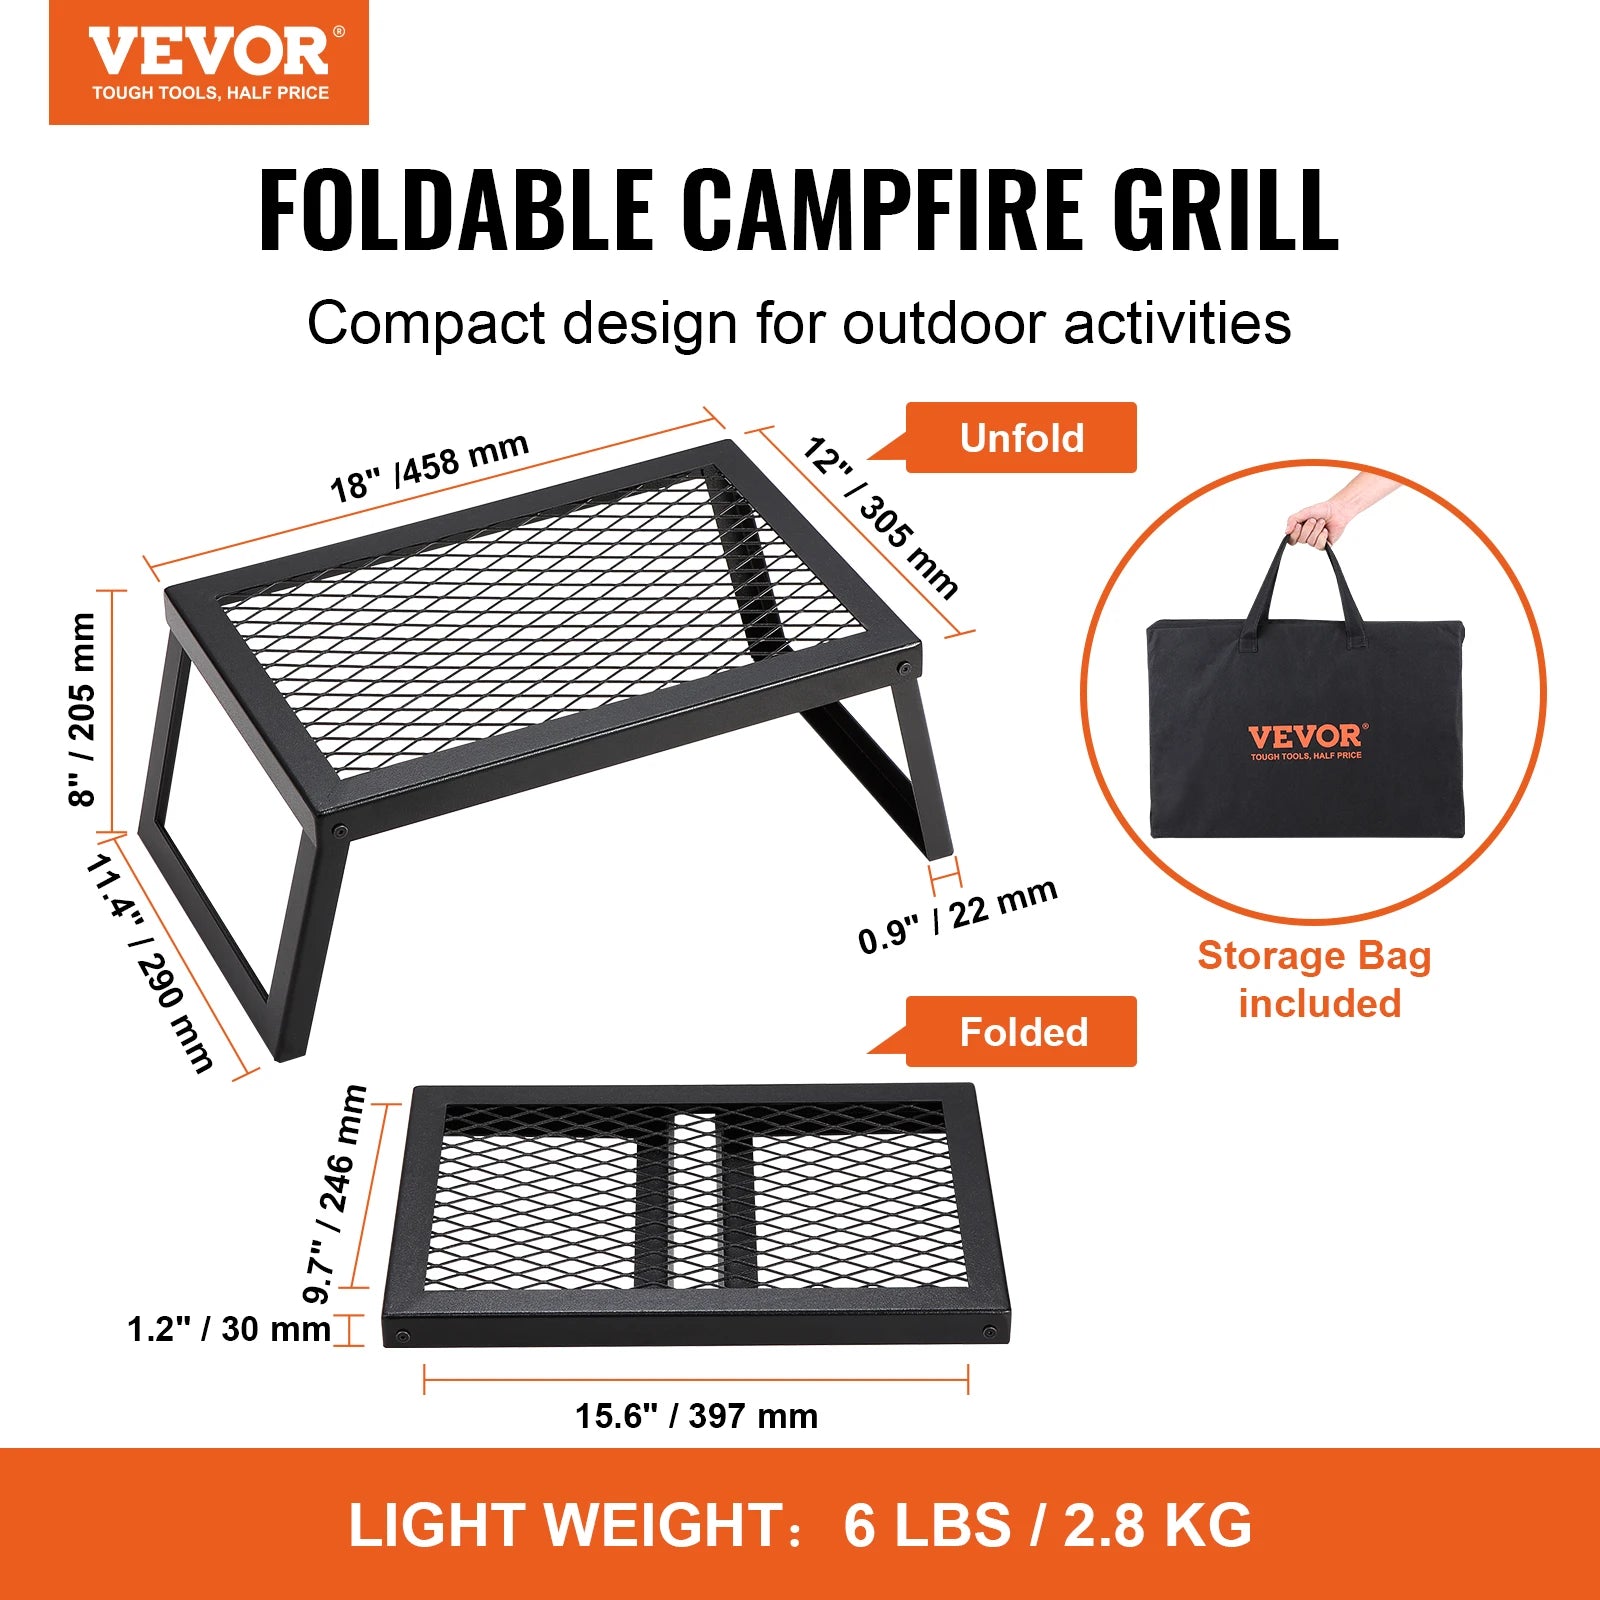 VEVOR 18/24in Outdoor Barbecue Charcoal Grill - My Store